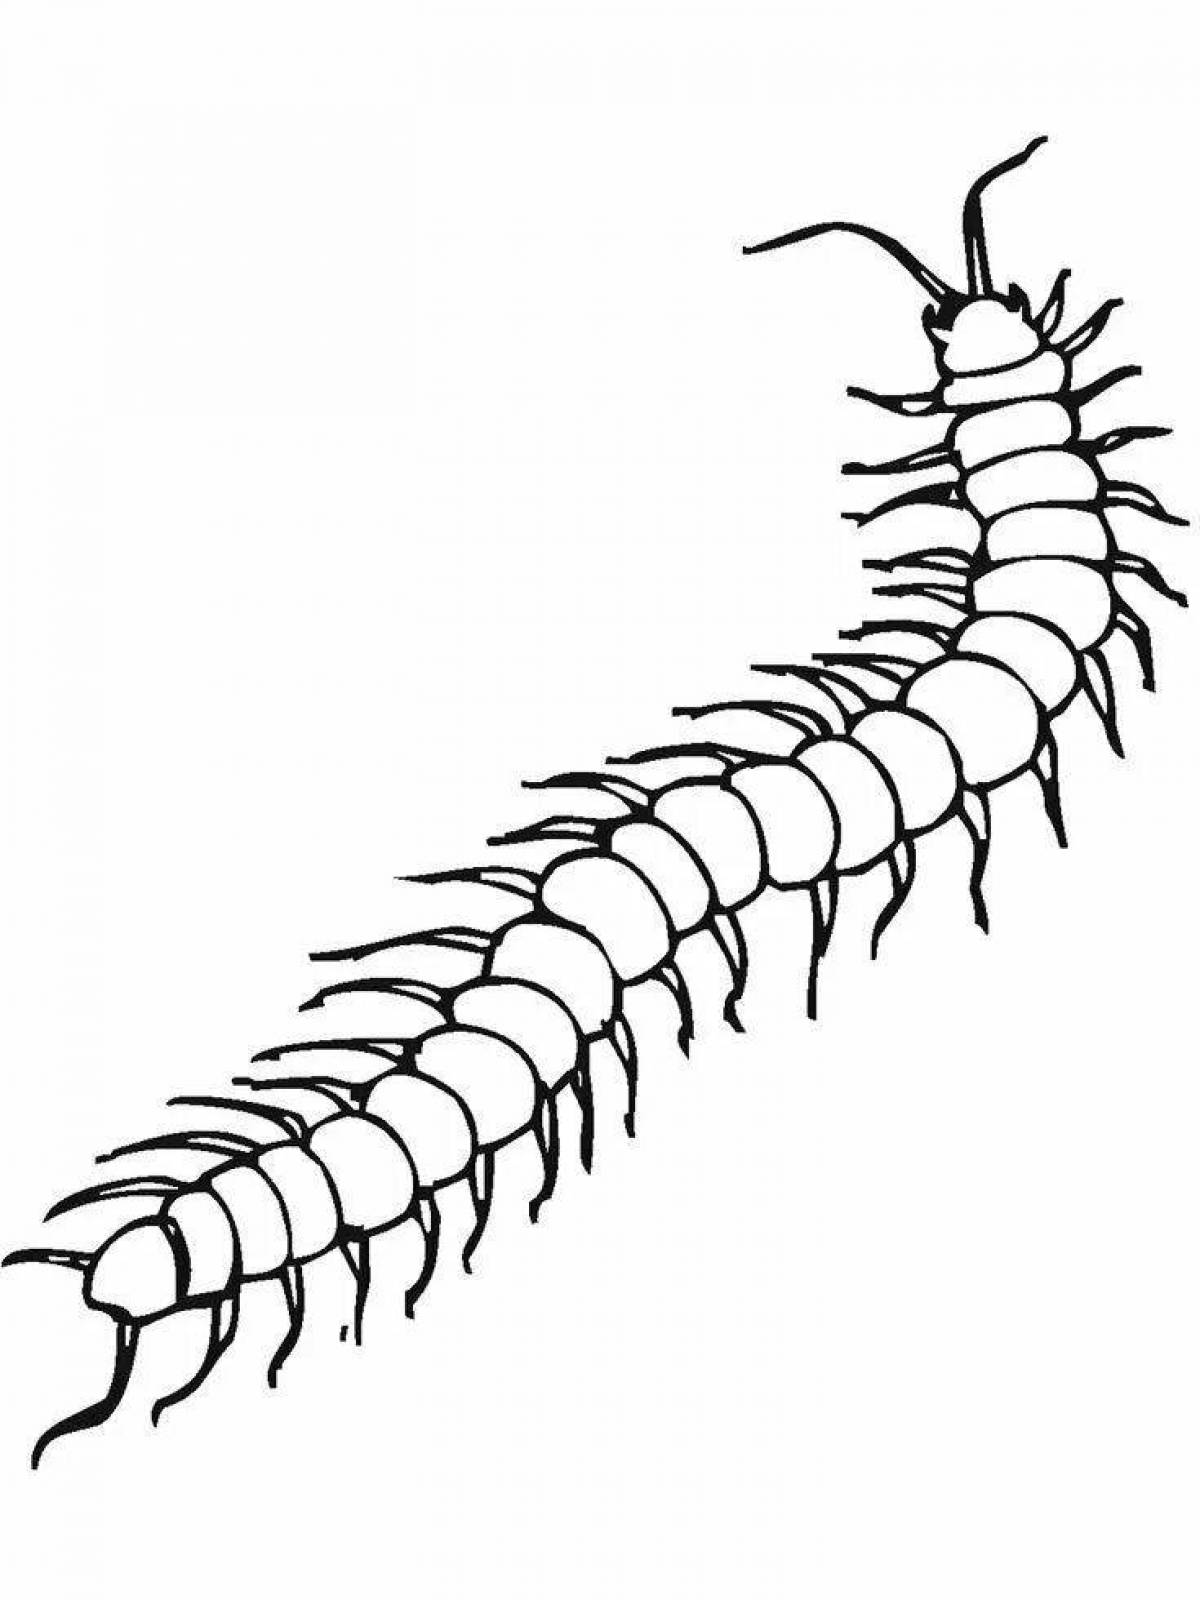 Color-frenzy centipede coloring page